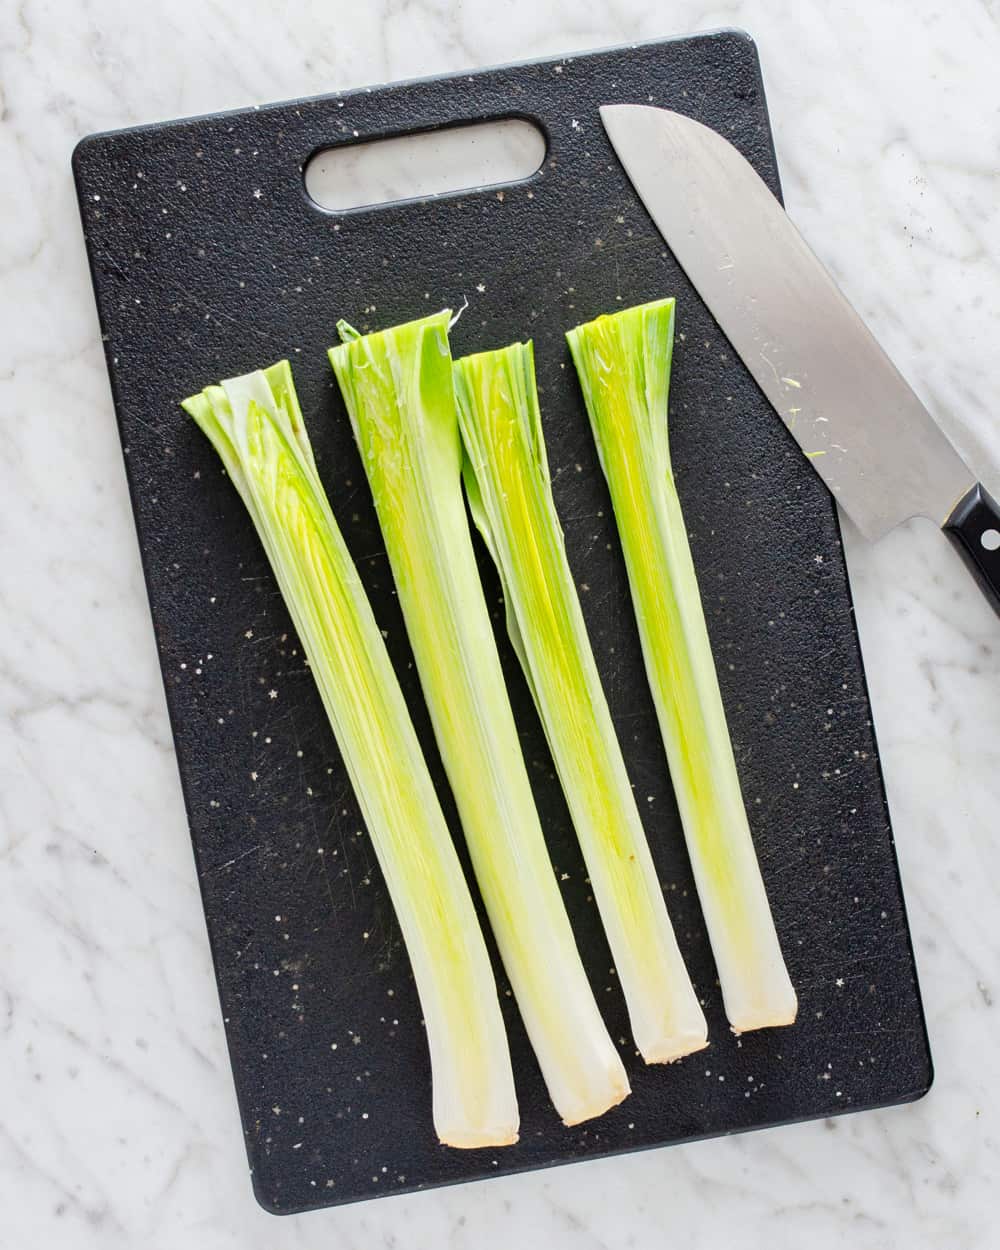 How to clean leeks - Leeks sliced in half lengthwise to clean out the dirt.